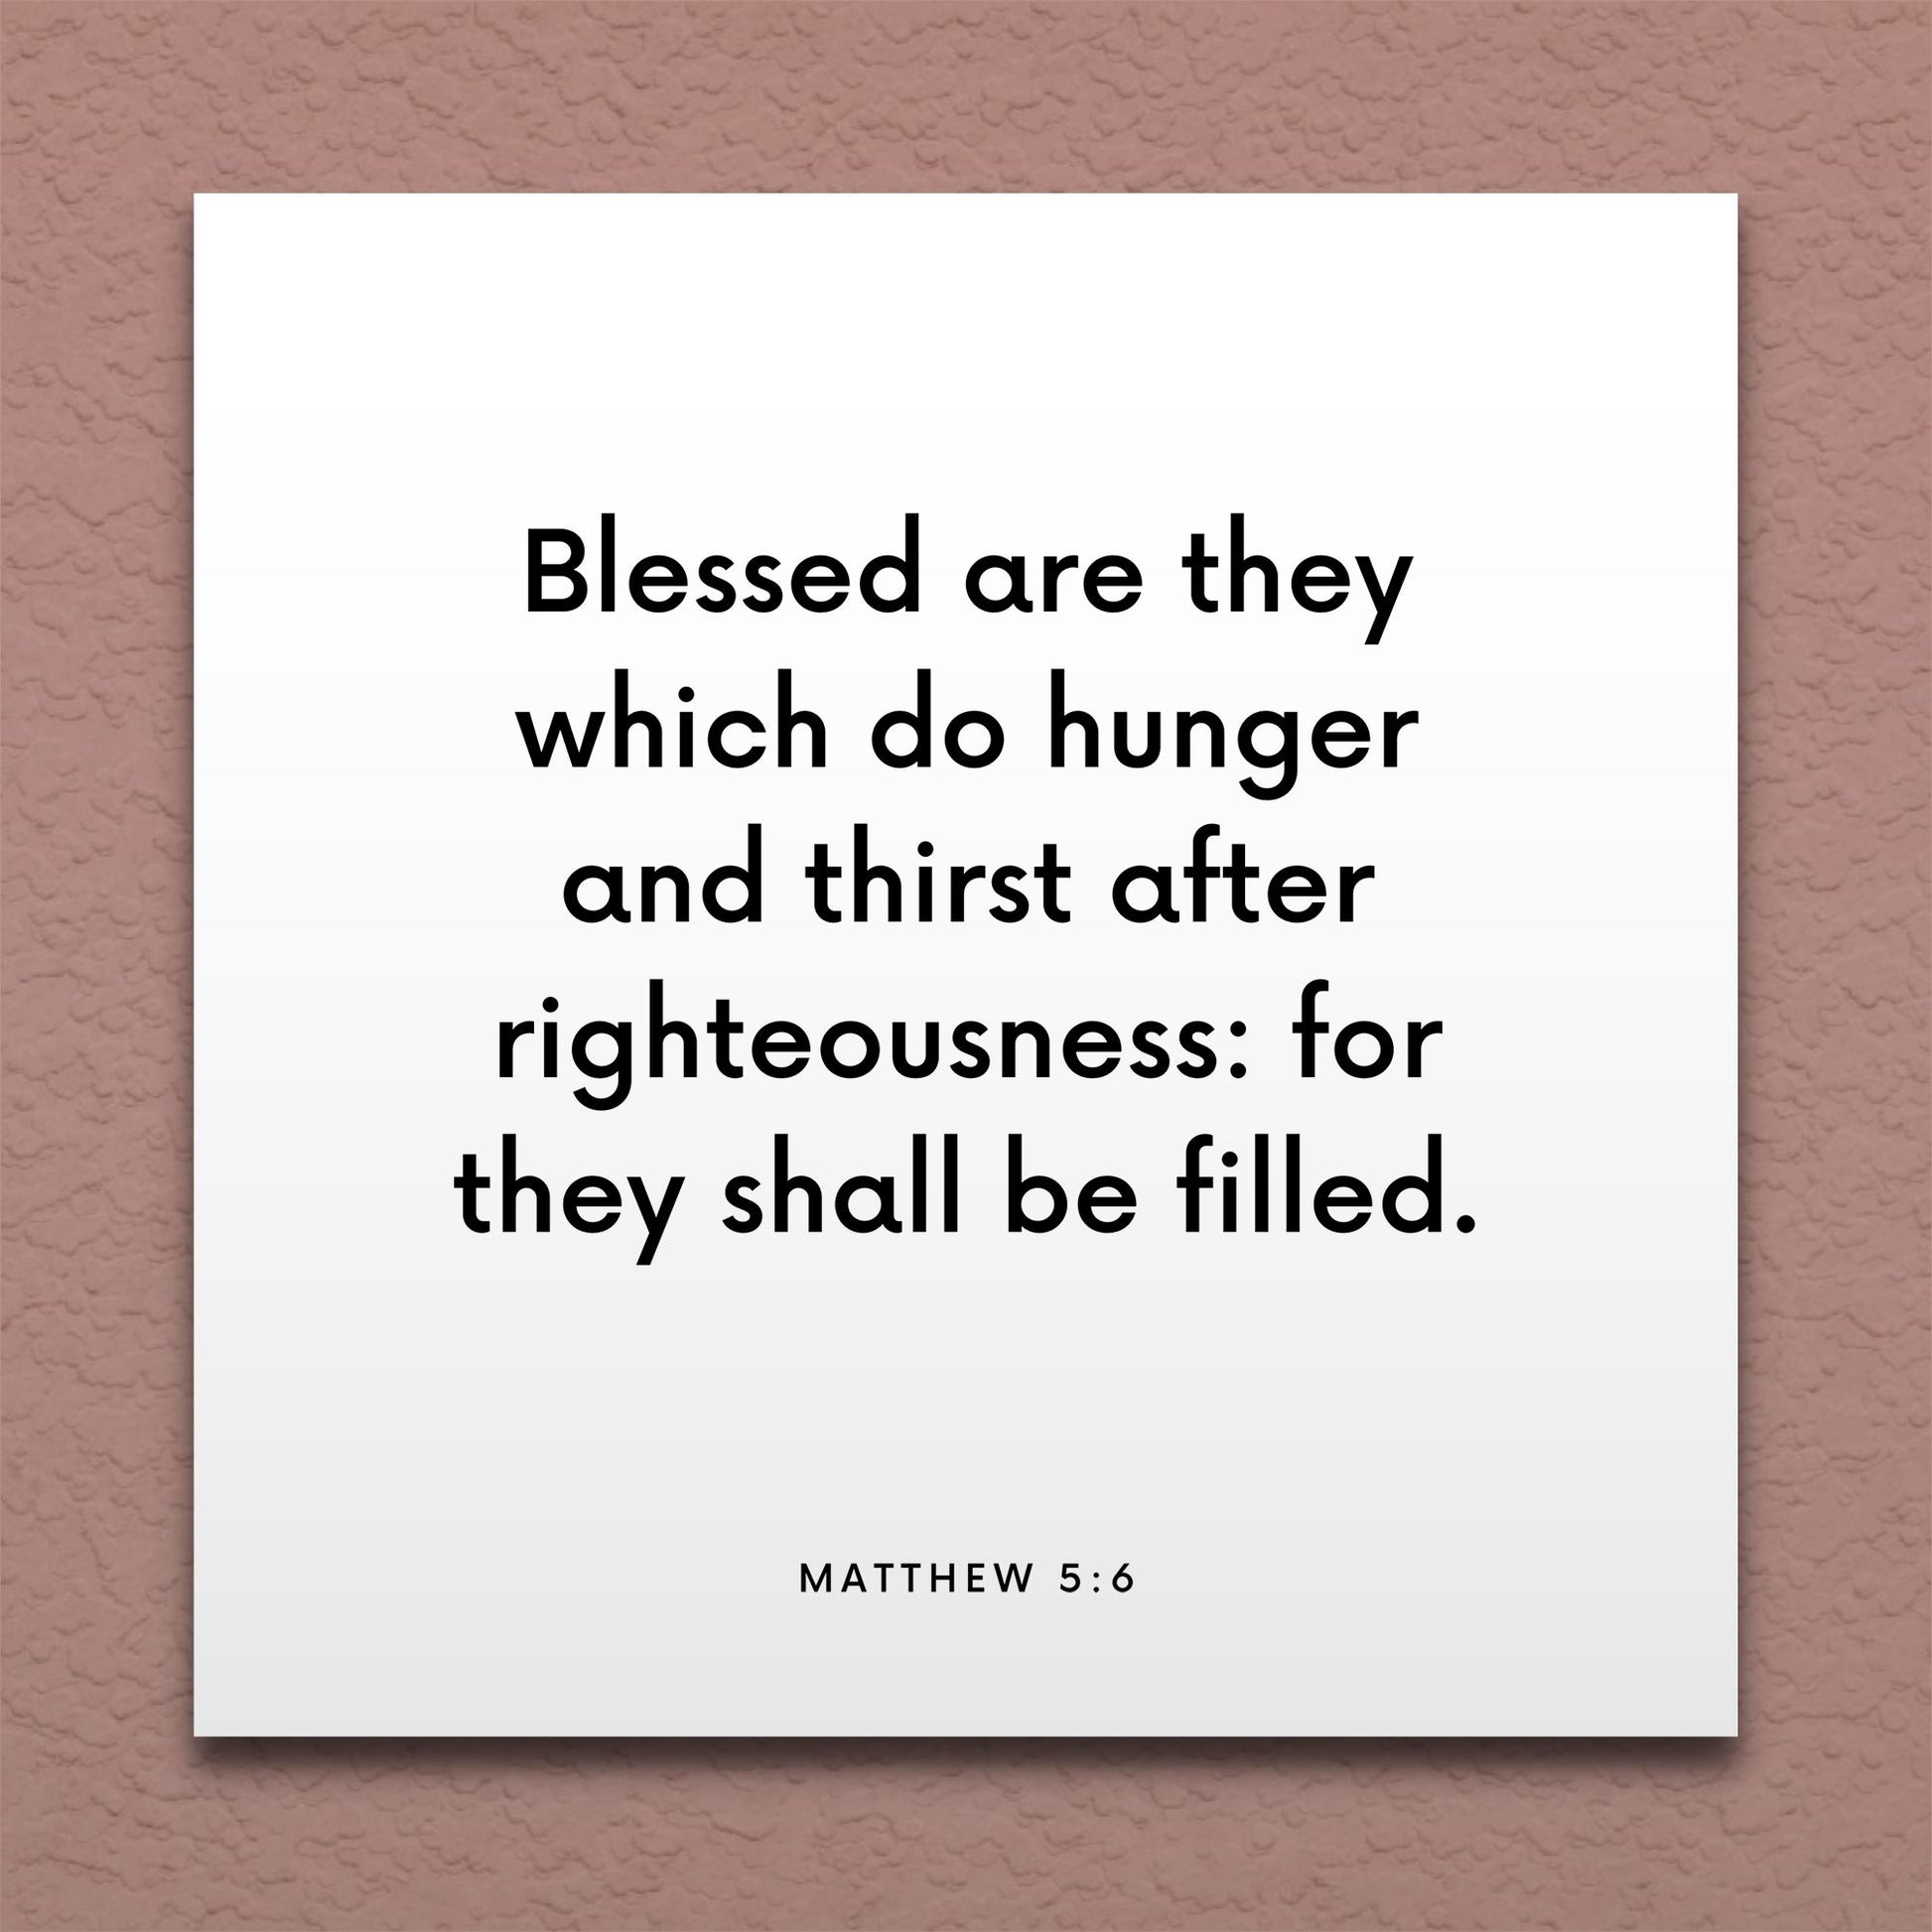 Wall-mounted scripture tile for Matthew 5:6 - "Blessed are they which hunger and thirst after righteousness"